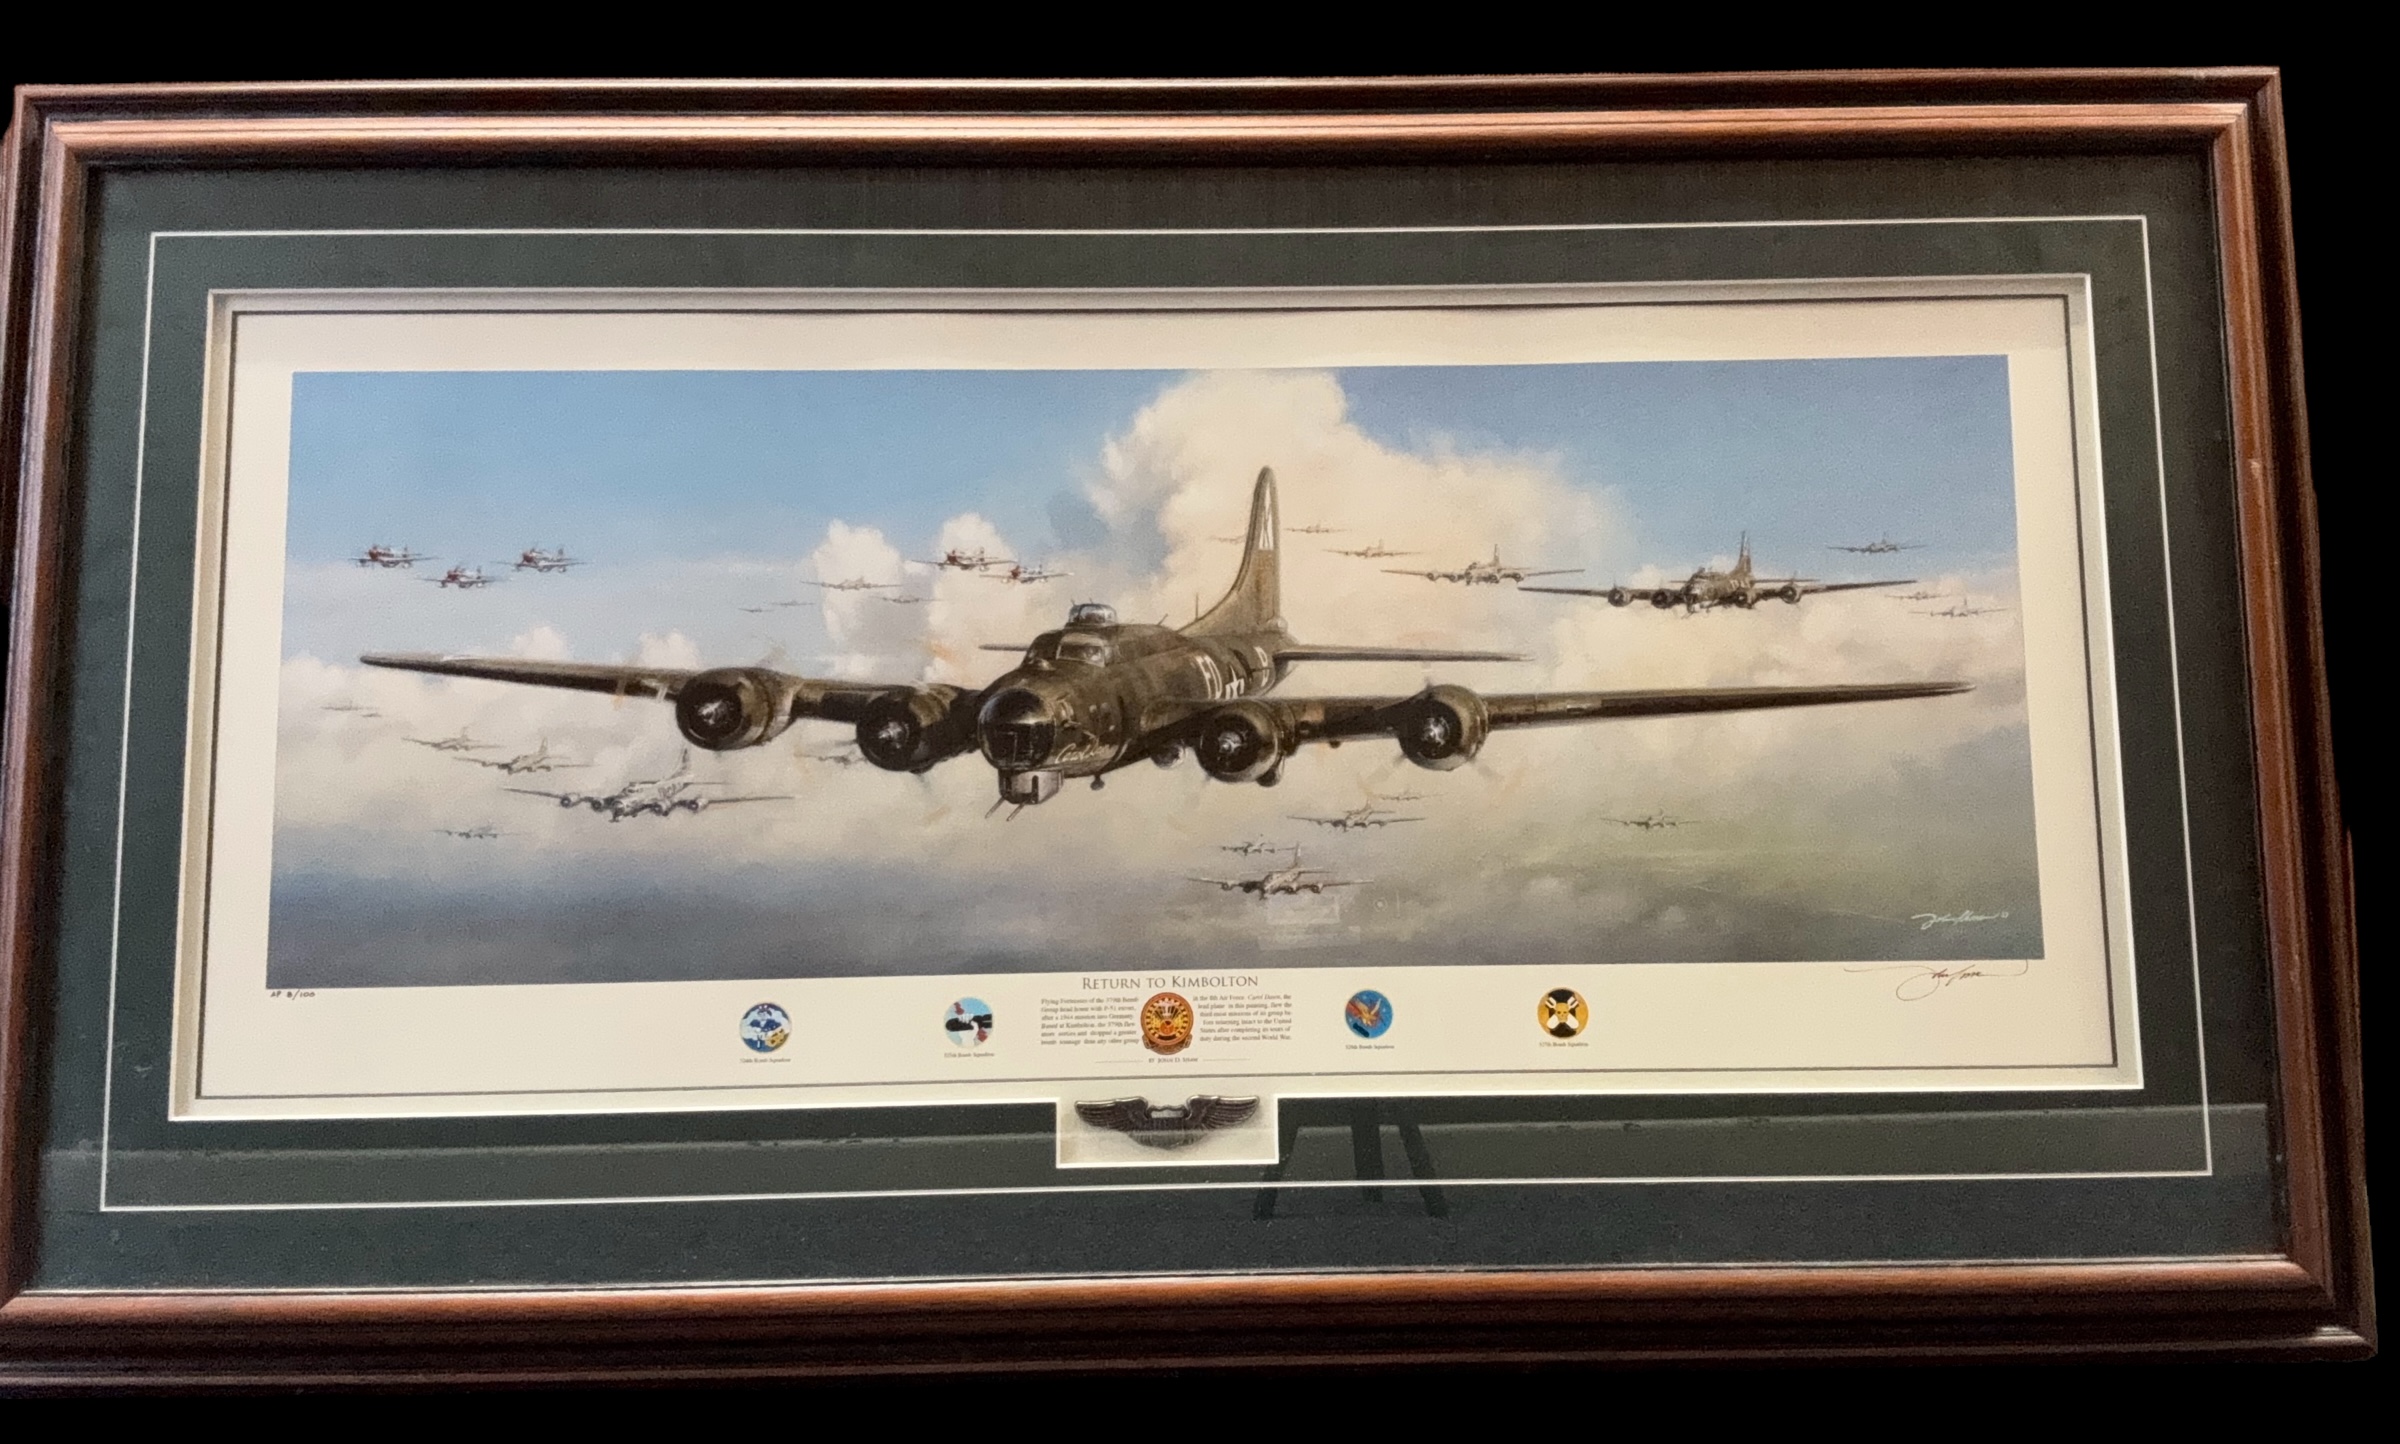 WW2 Print titled Return to Kimbolton by John D. Shaw Artist Proof limited 8/100. Signed by the